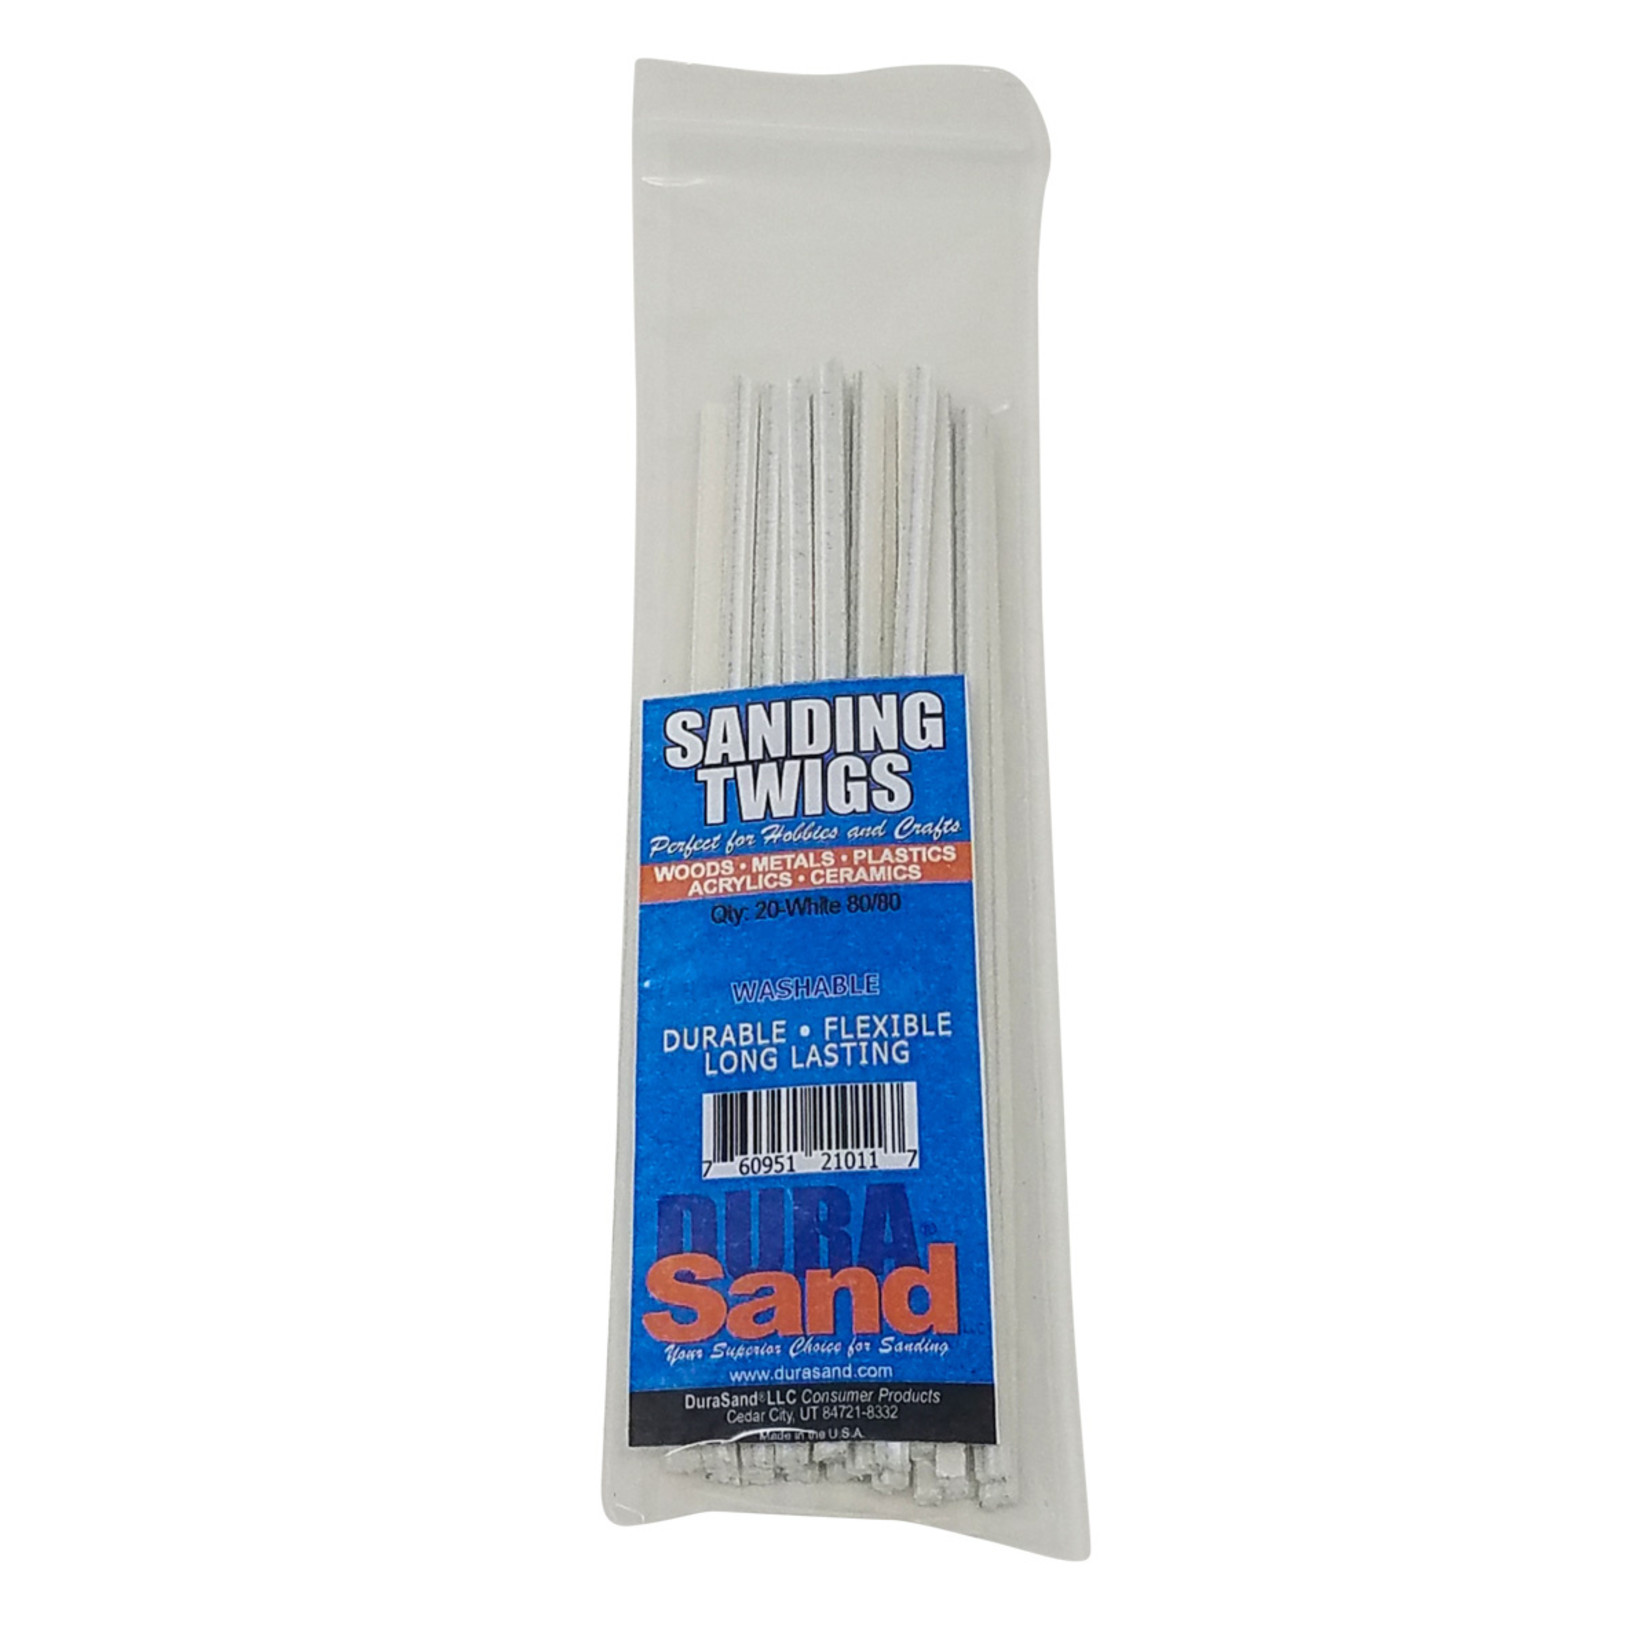 Durasand Sanding Twigs, 20 Pieces Bagged, 80/80 White